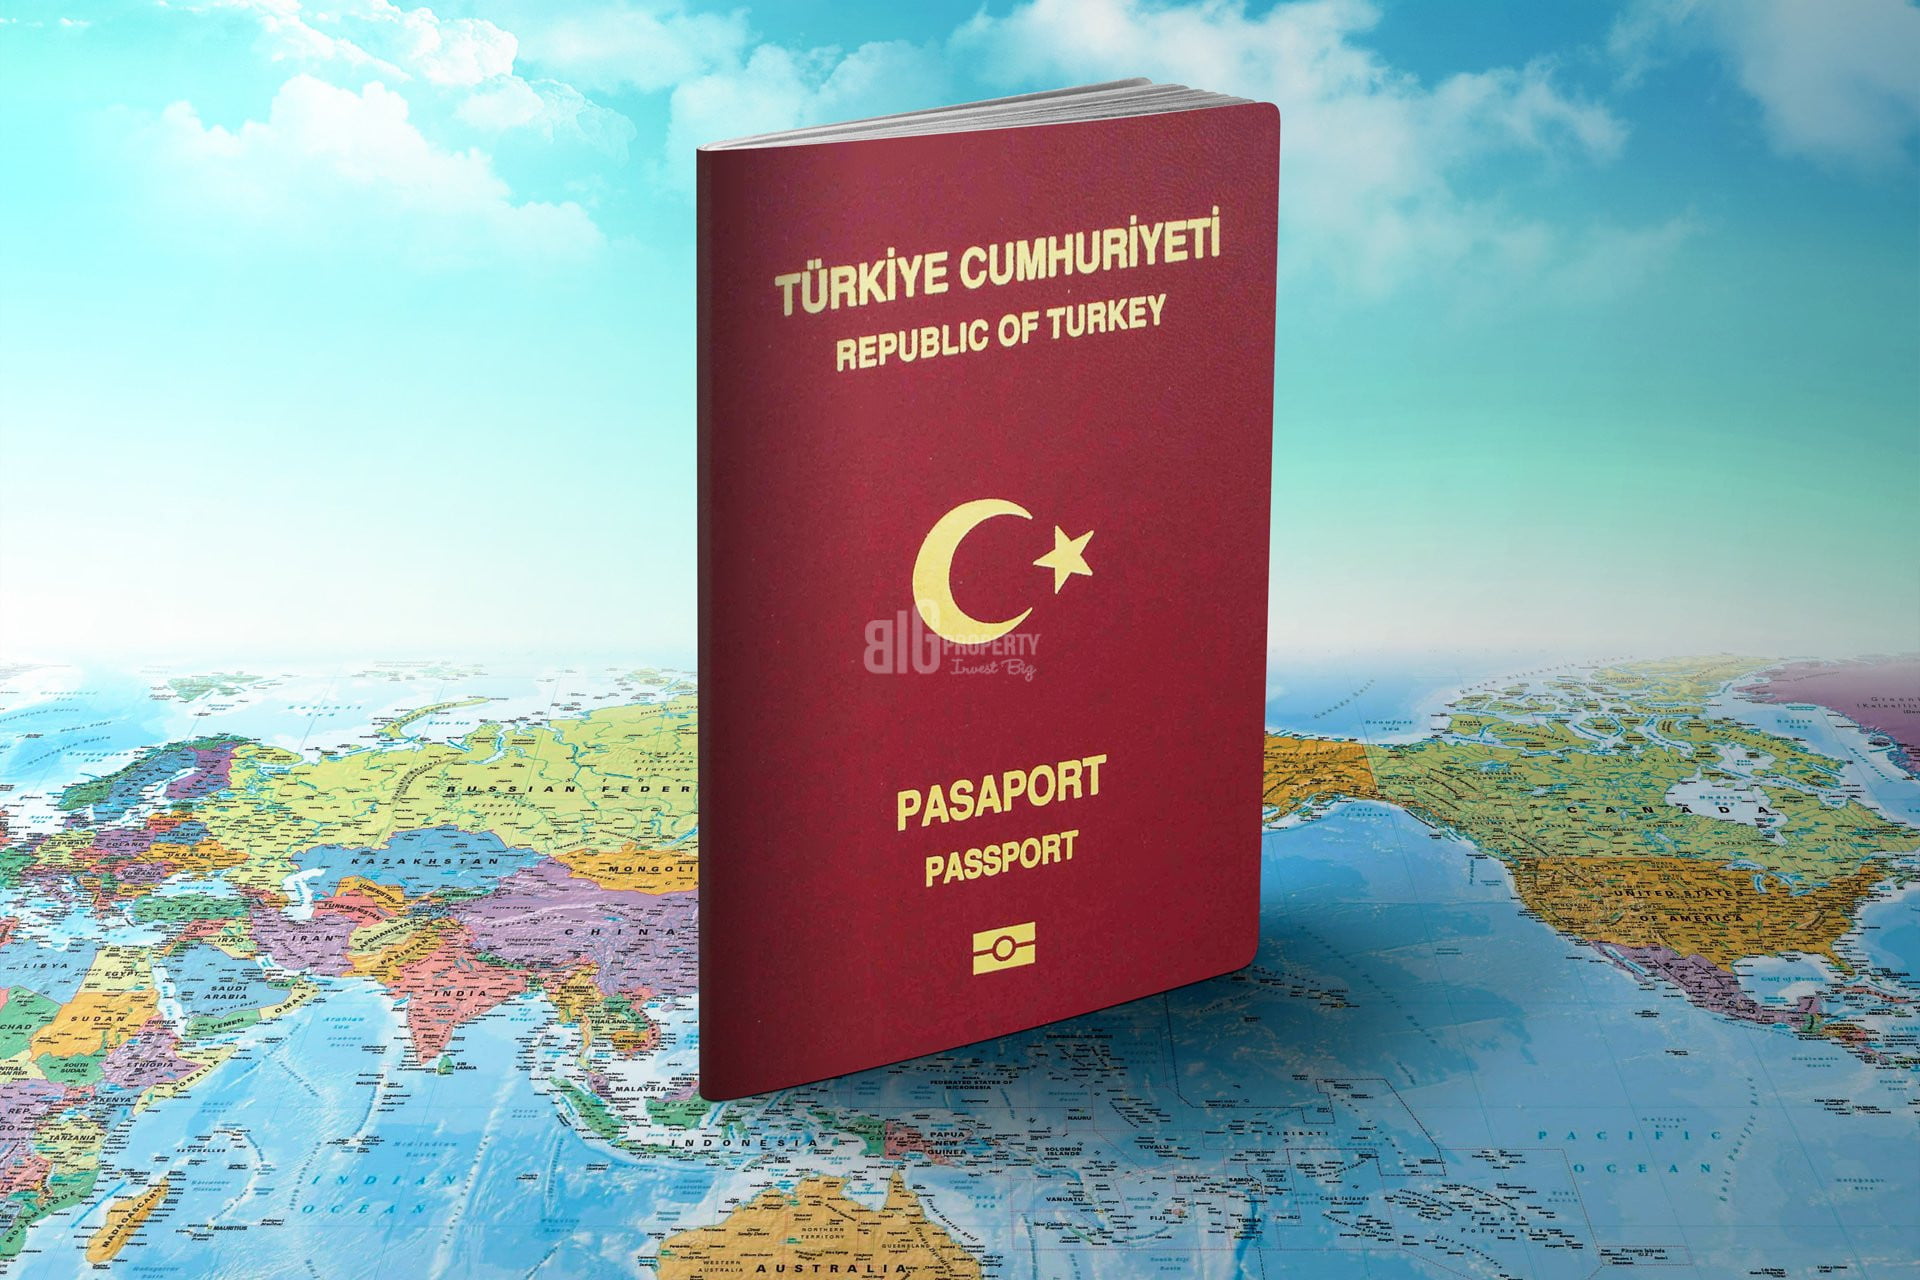 Ukrainians and Russians who headed to Turkey have the opportunity to obtain Turkish Citizenship